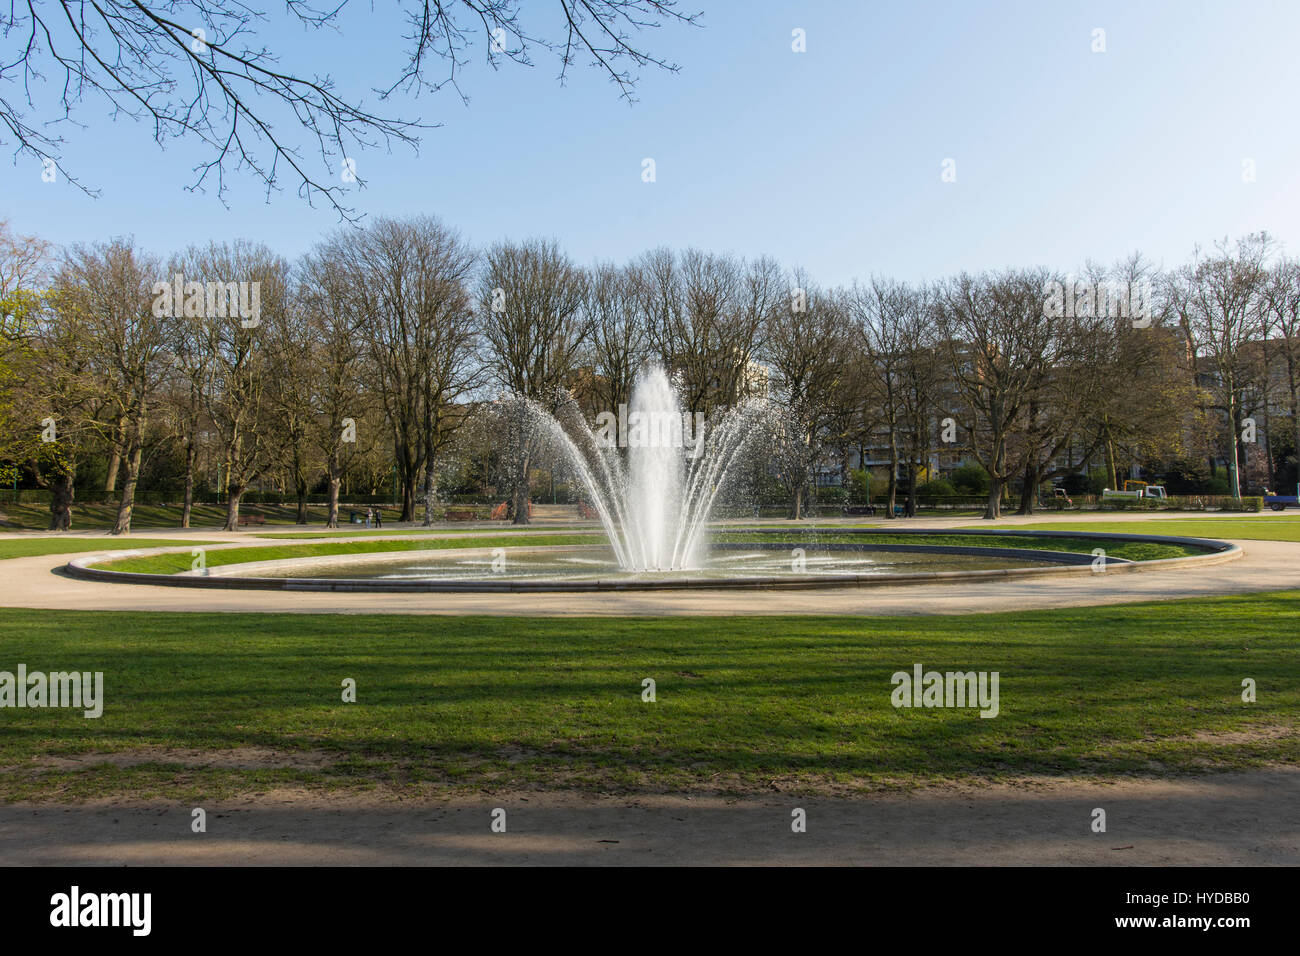 A fountain in a park Stock Photo